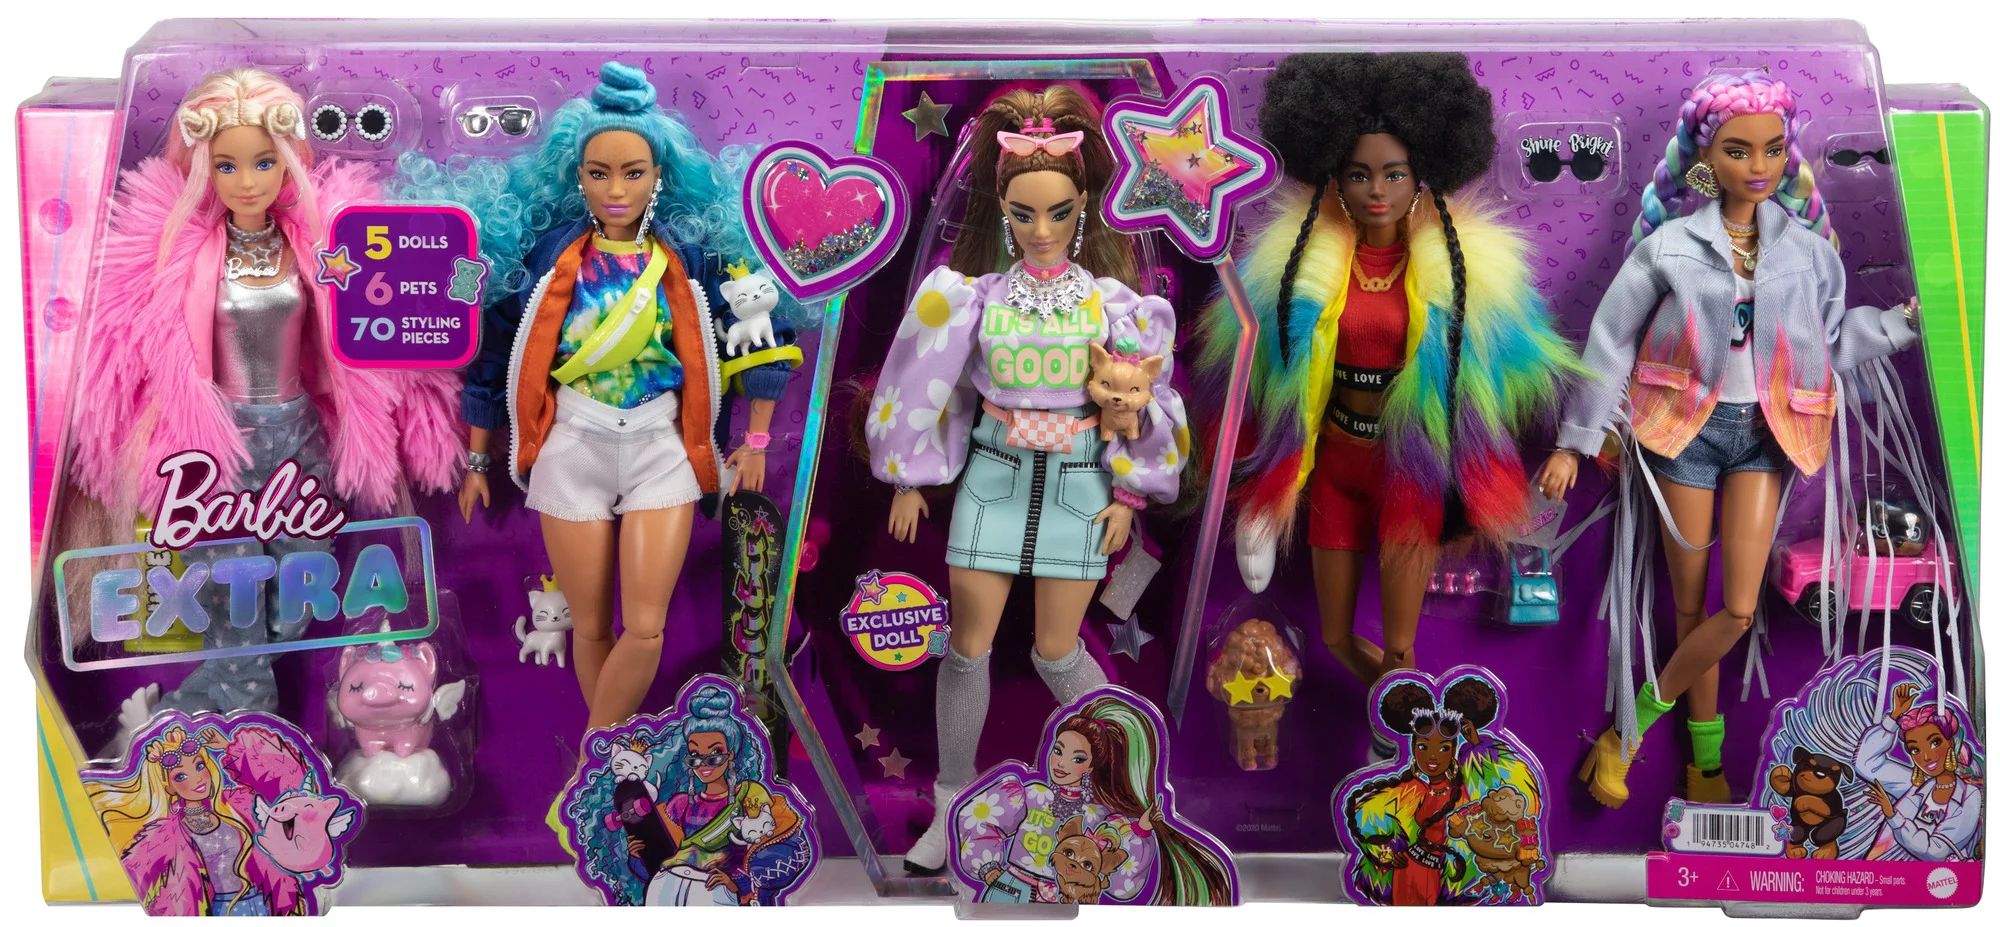 Barbie Extra 5-Doll Set with 6 Pets & 70 Styling Pieces for Kids 3 Years Old & Up - Walmart.com | Walmart (US)